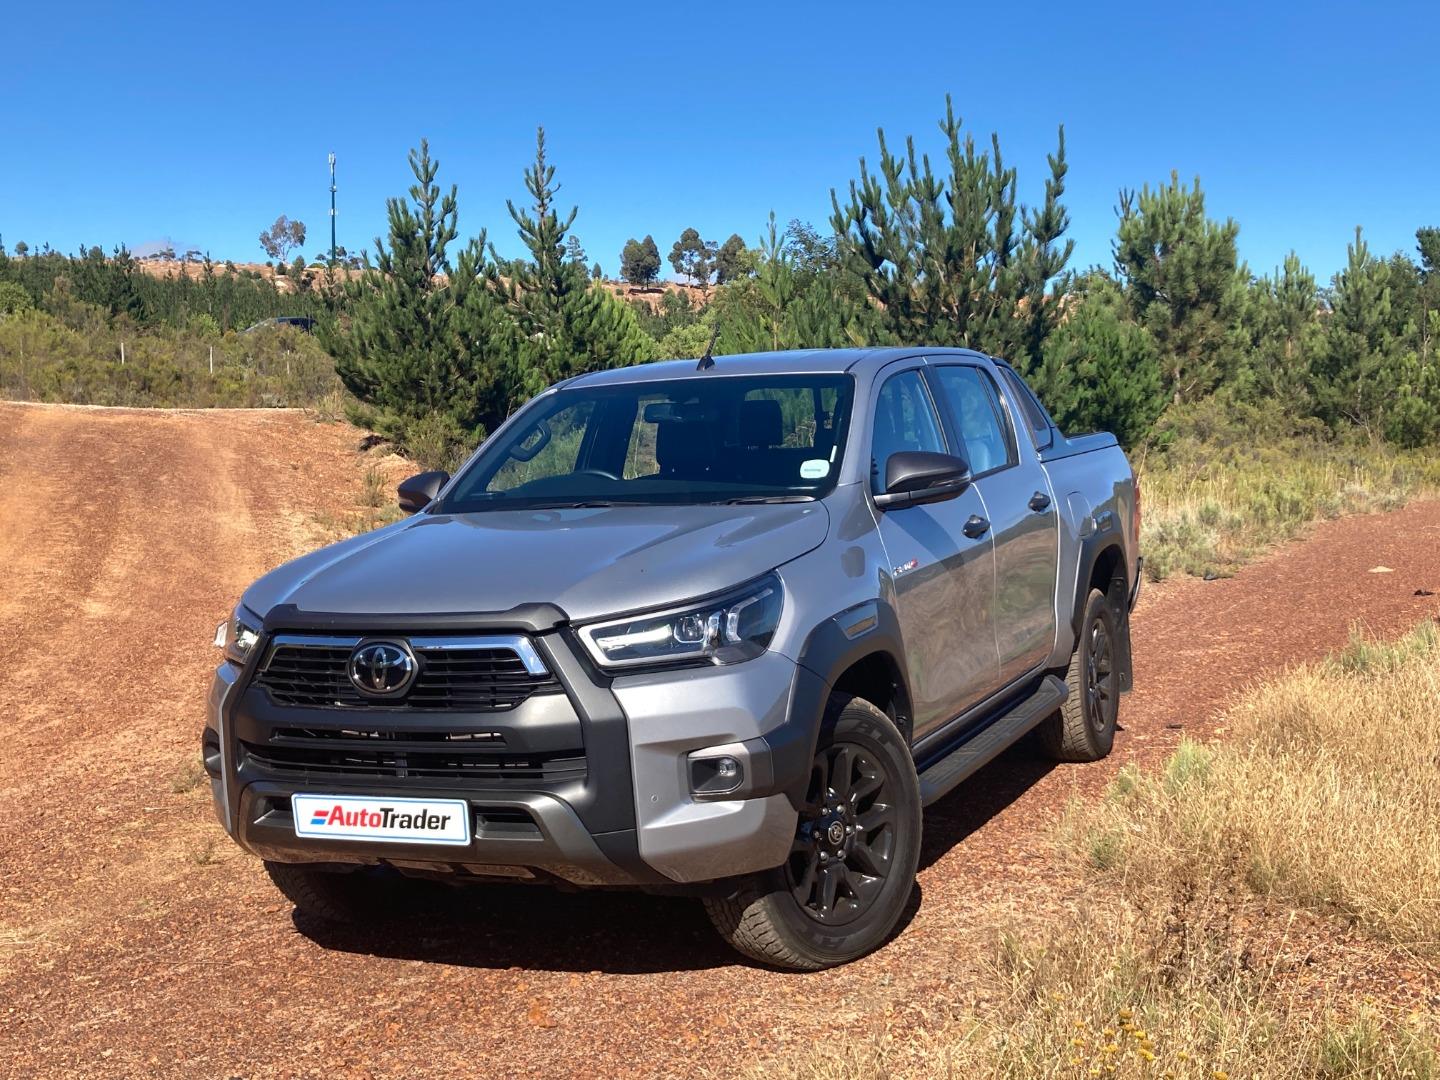 Is the Toyota Hilux Legend good for new drivers? Buying a Car